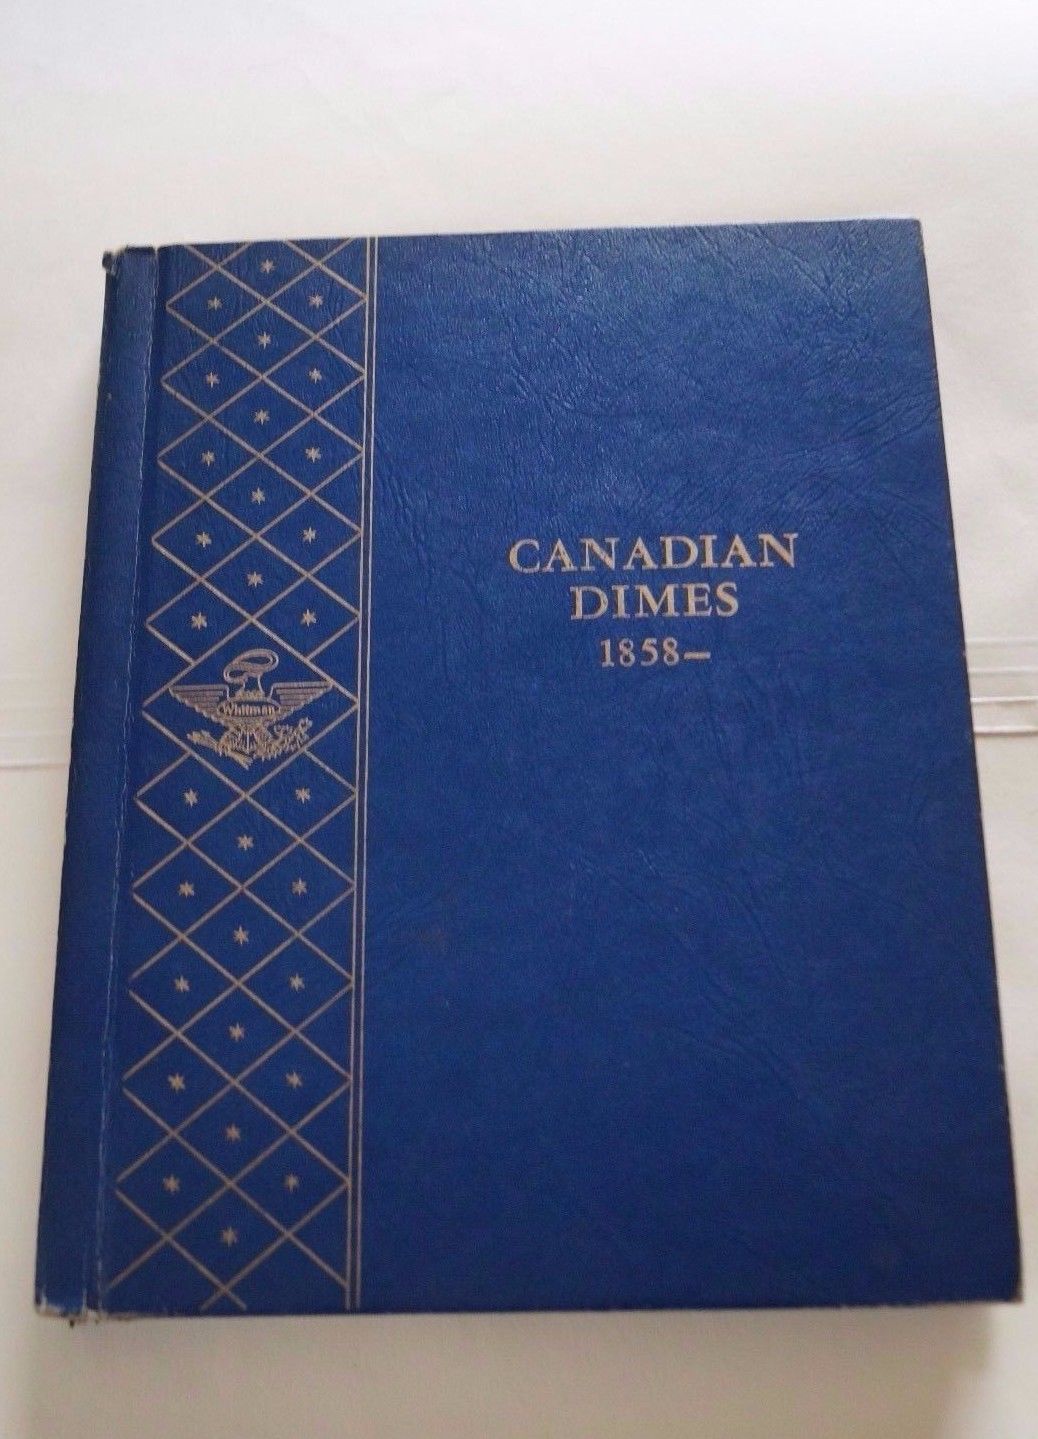 Canadian Dimes #9504 (1858-19XX) Whitman Classic Album - WITH 34 Silver Coins